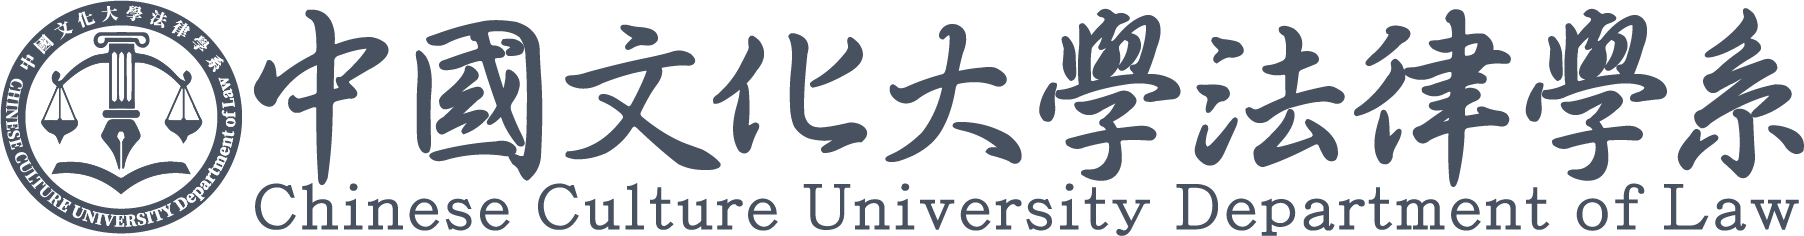 Chinese Culture University Department of Law